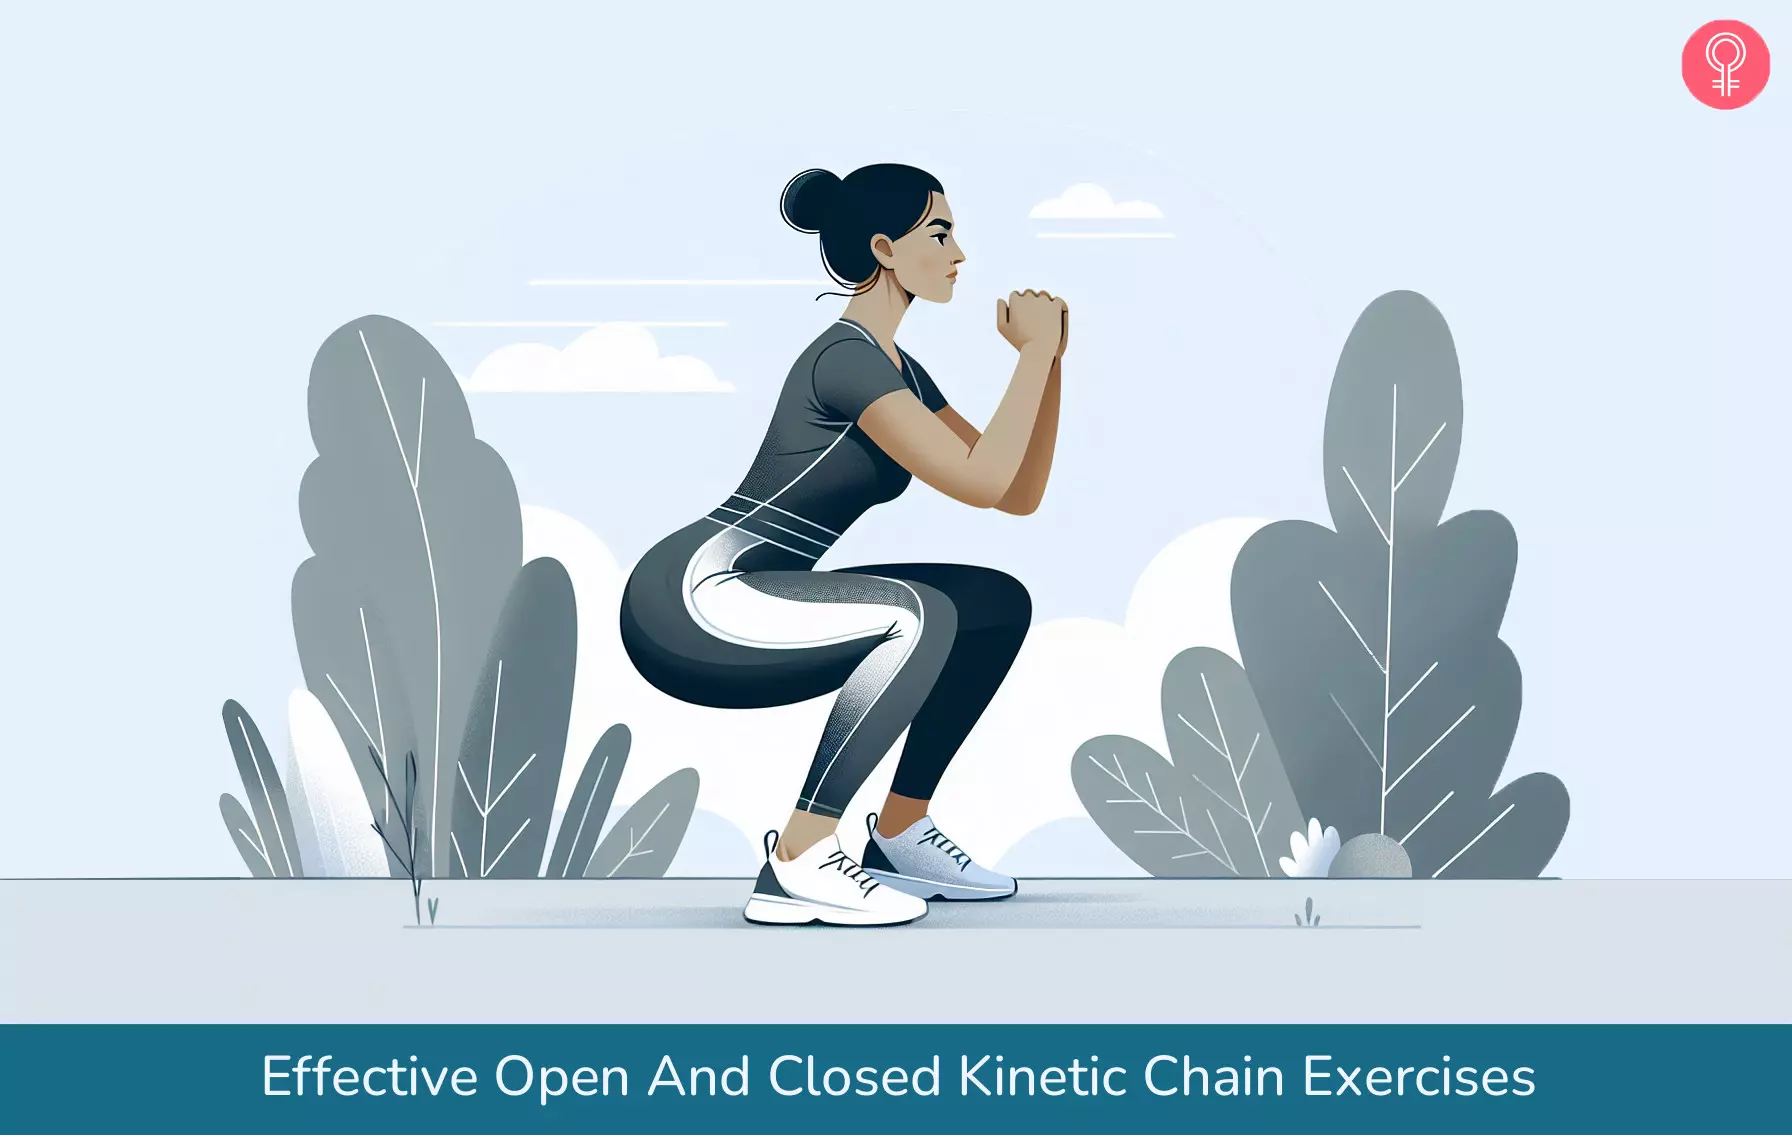 12 Effective Open And Closed Kinetic Chain Exercises